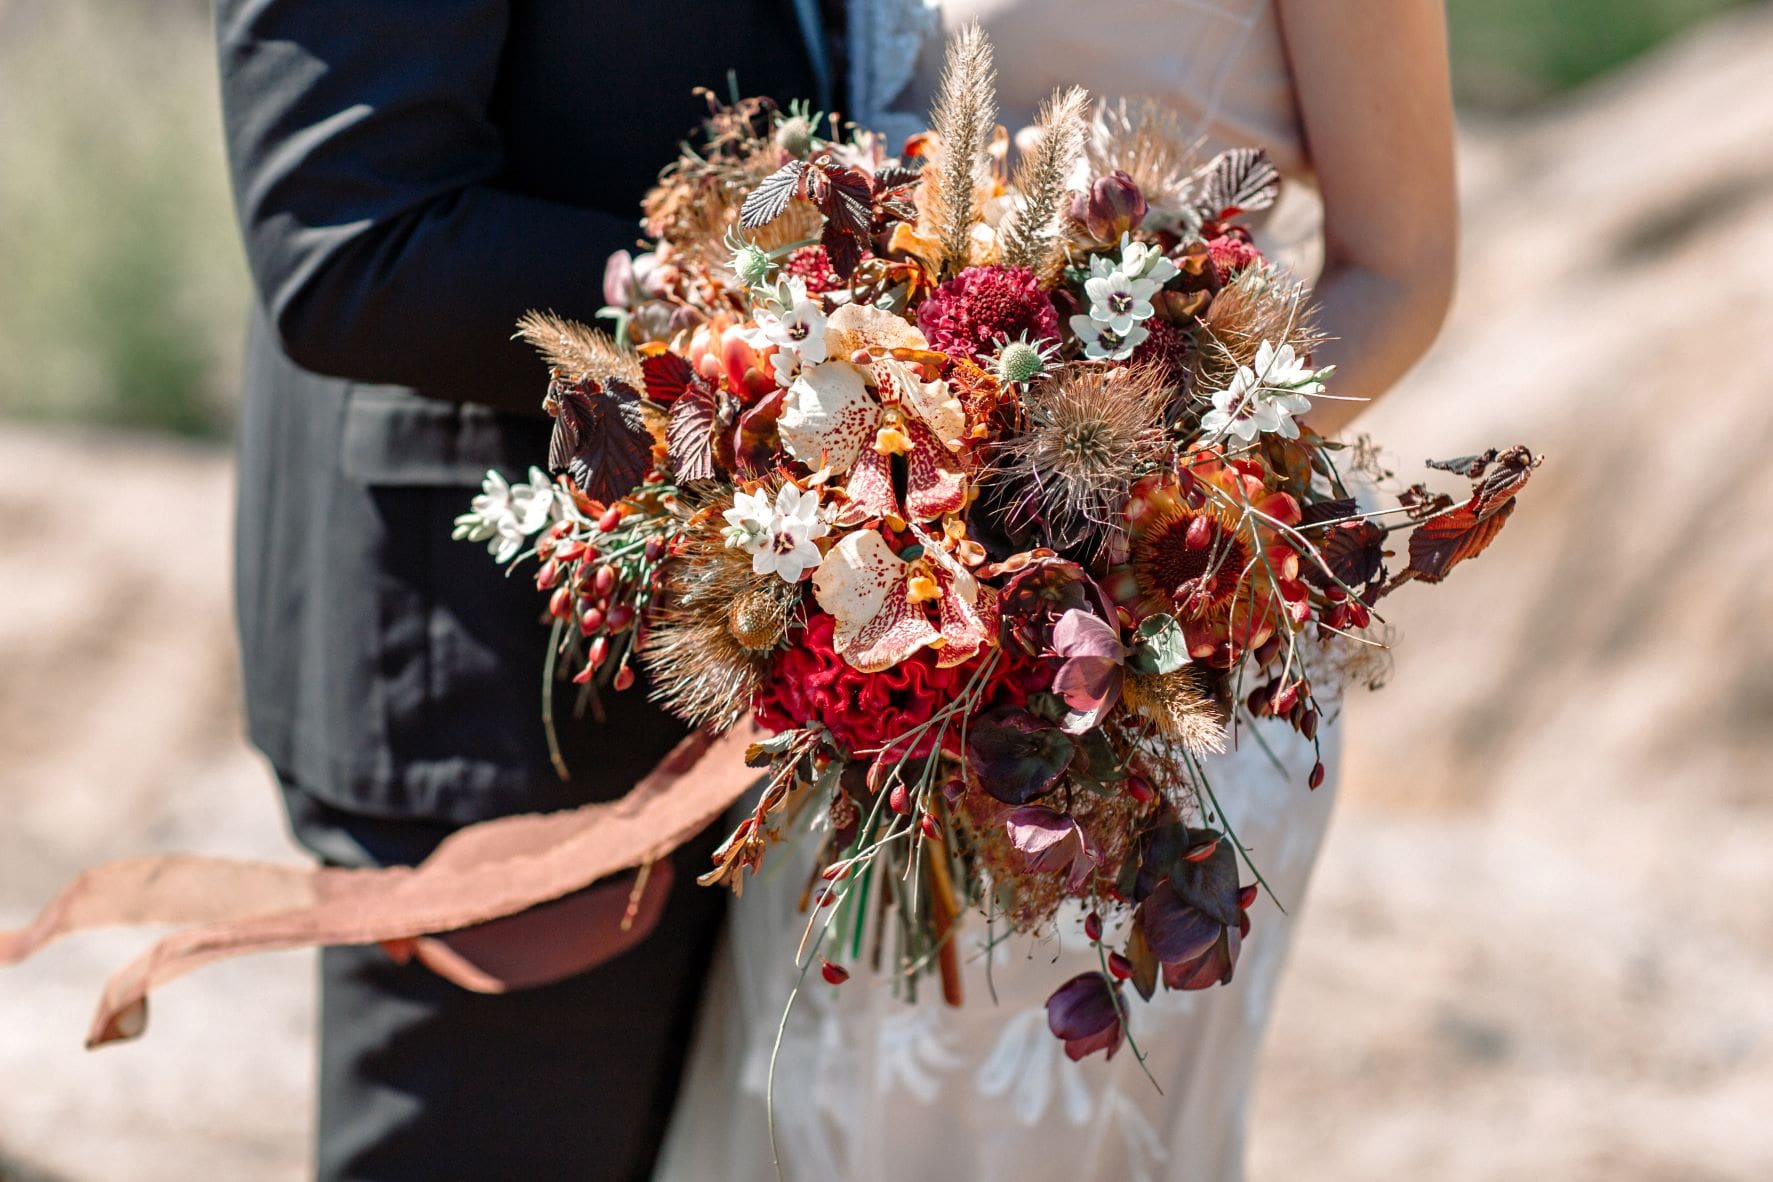 They're Back! Dried Flowers Are Trending for Weddings in 2020